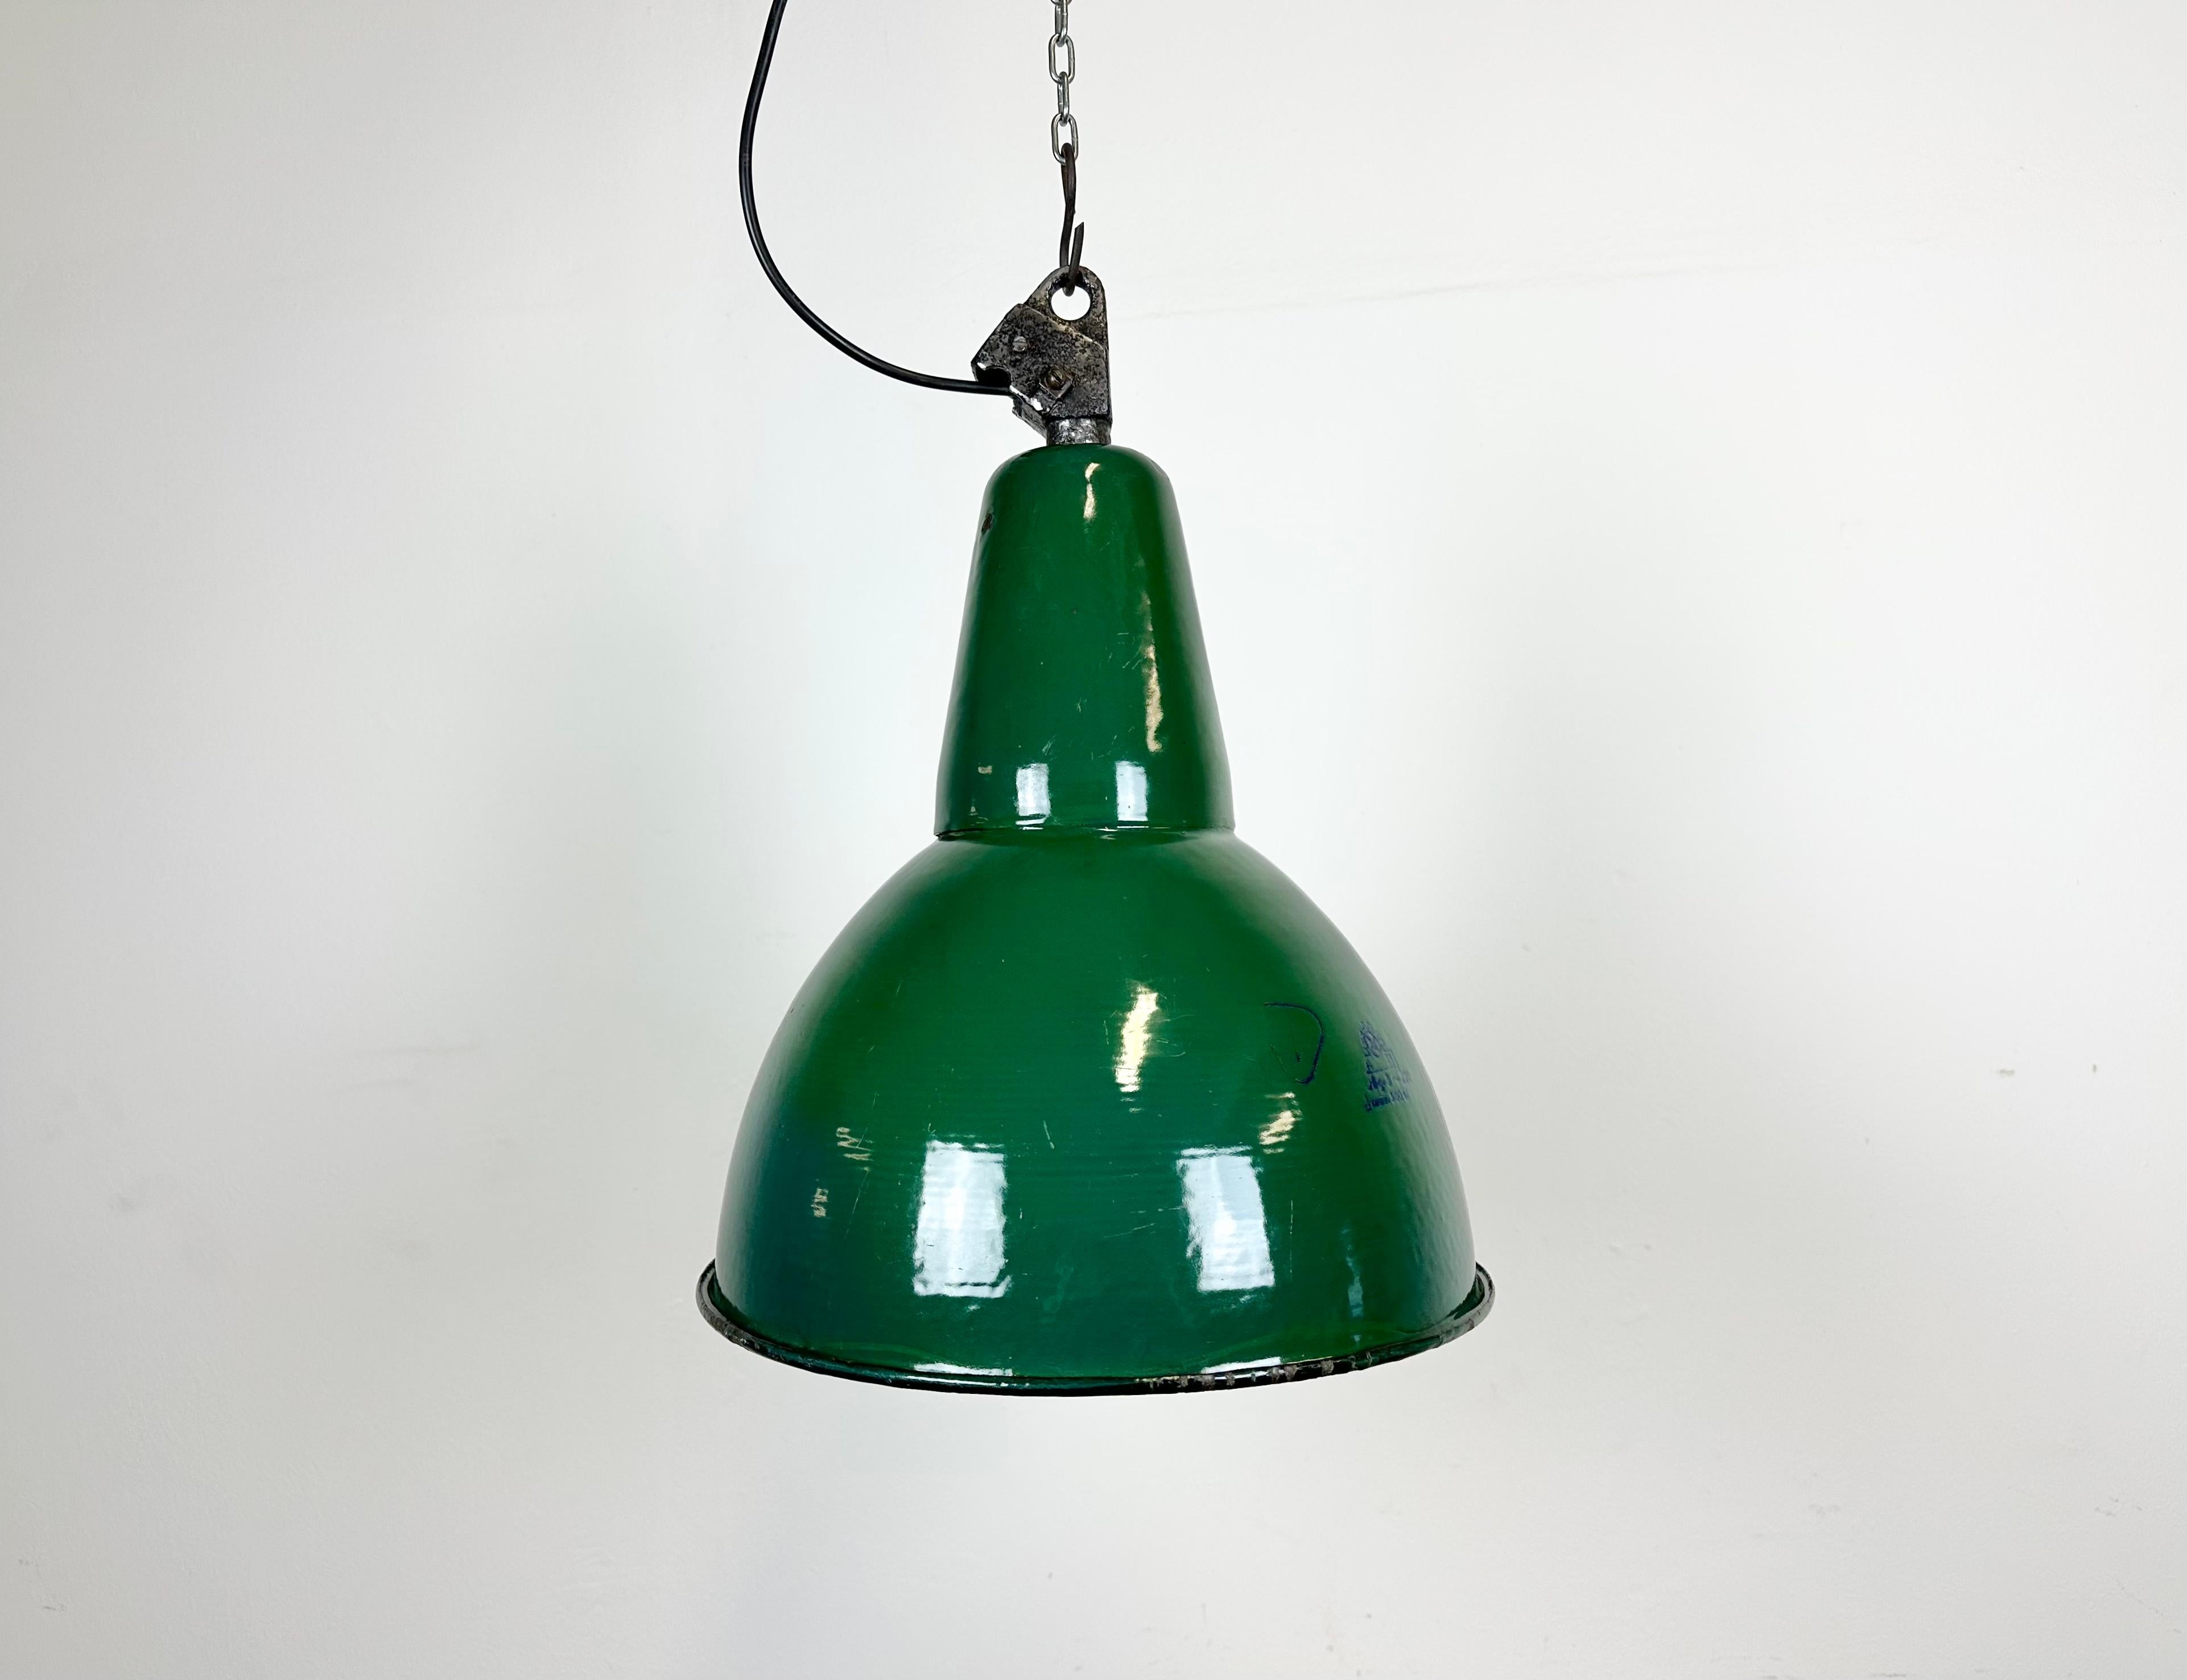 Industrial green enamel pendant light made by Polam Wilkasy in Poland during the 1960s. White enamel inside the shade. Cast iron top. The porcelain socket requires E 27/ E 26 light bulbs. New wire. Fully functional. The weight of the lamp is 2 kg.